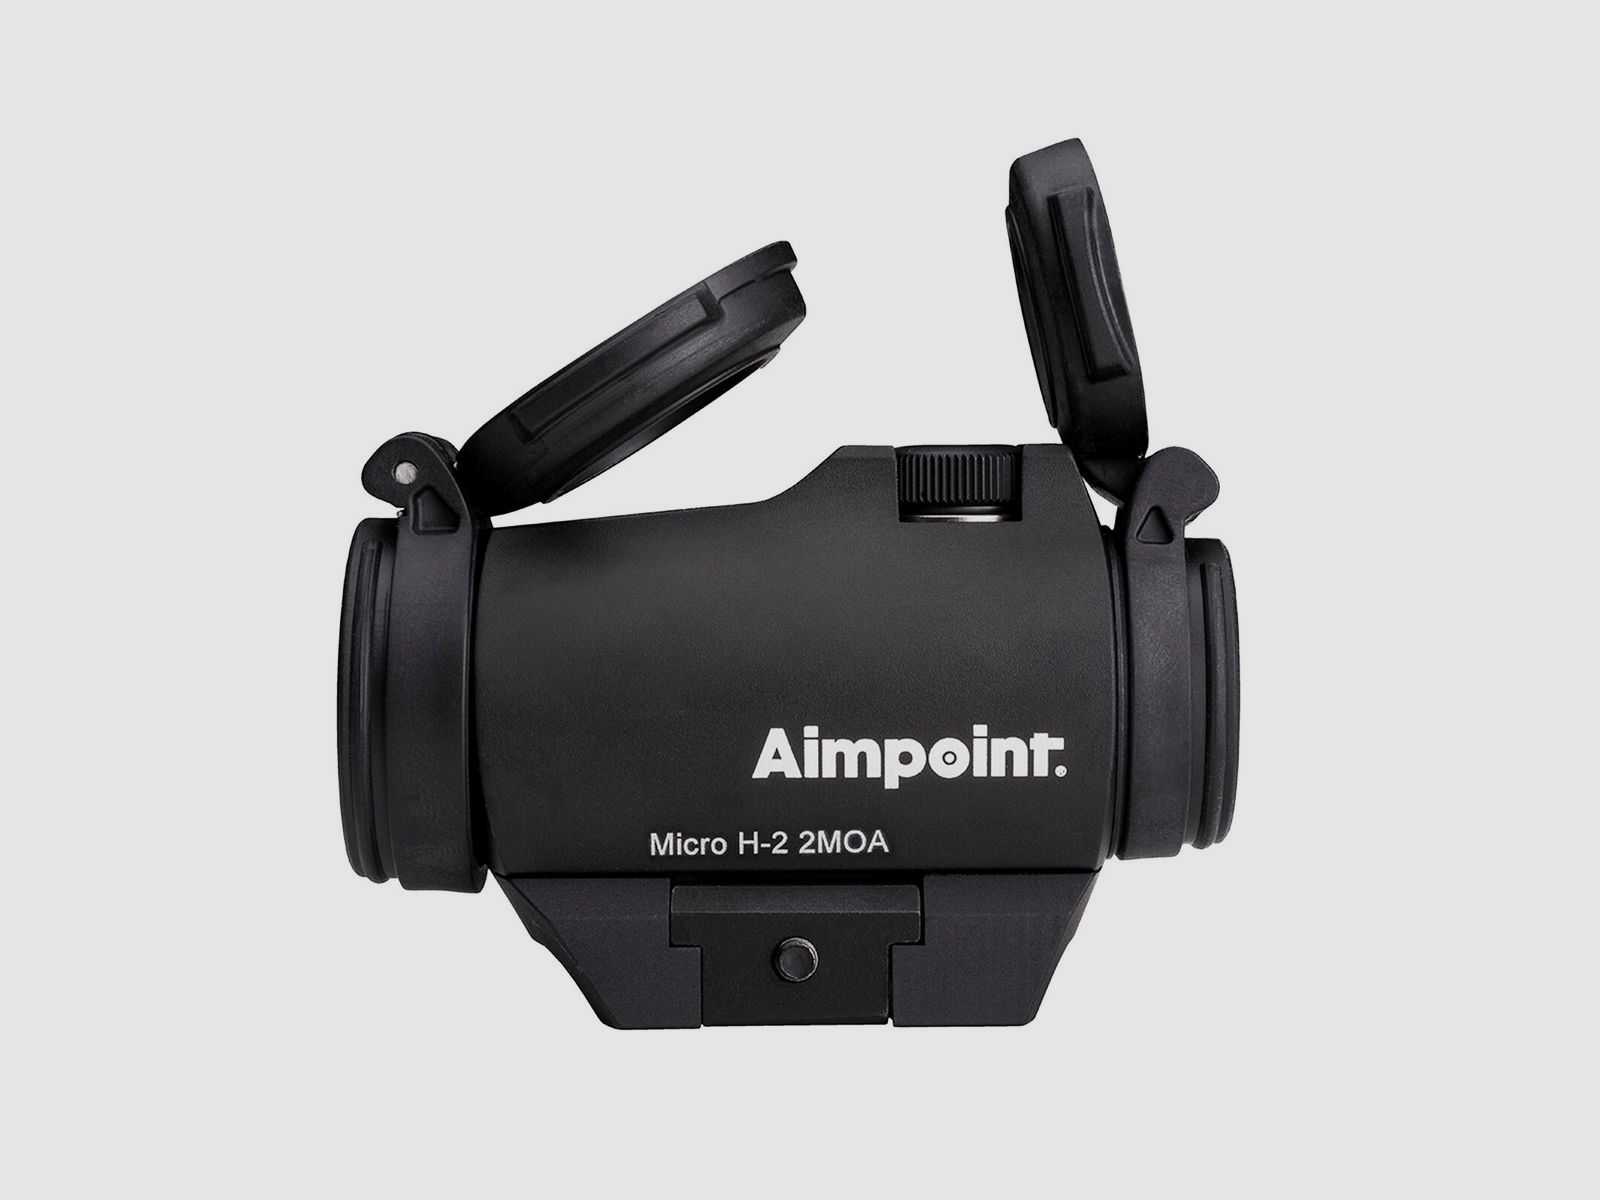 AIMPOINT	 AIMPOINT Micro H-2™ 6 MOA - Rotpunktvisier mit Standard Montage für Weaver / Picatinny